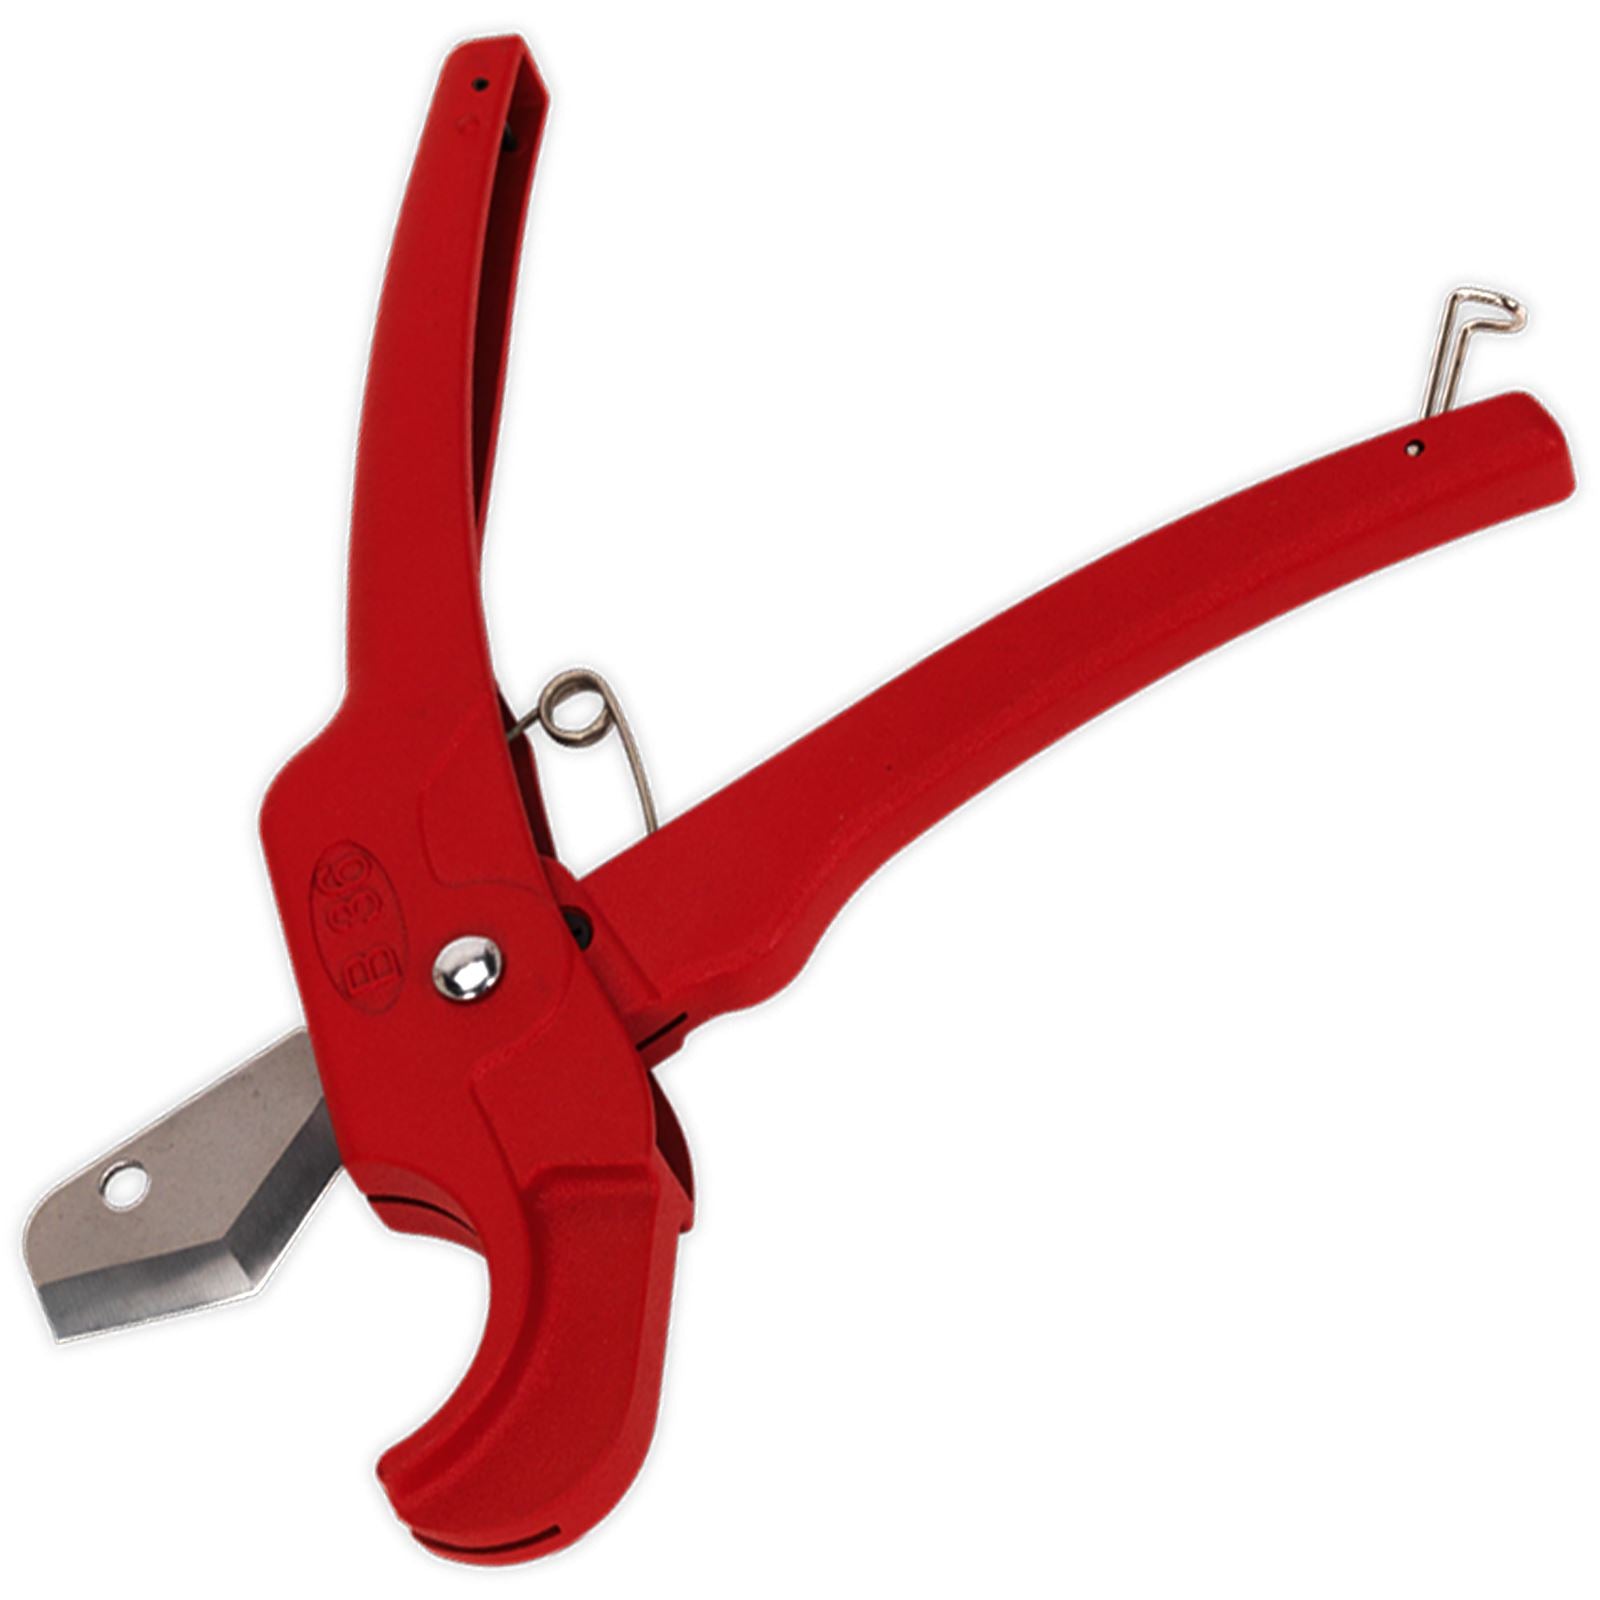 Sealey Premier 3-26mm Diameter Rubber and Reinforced Hose Cutter Pipe Pliers